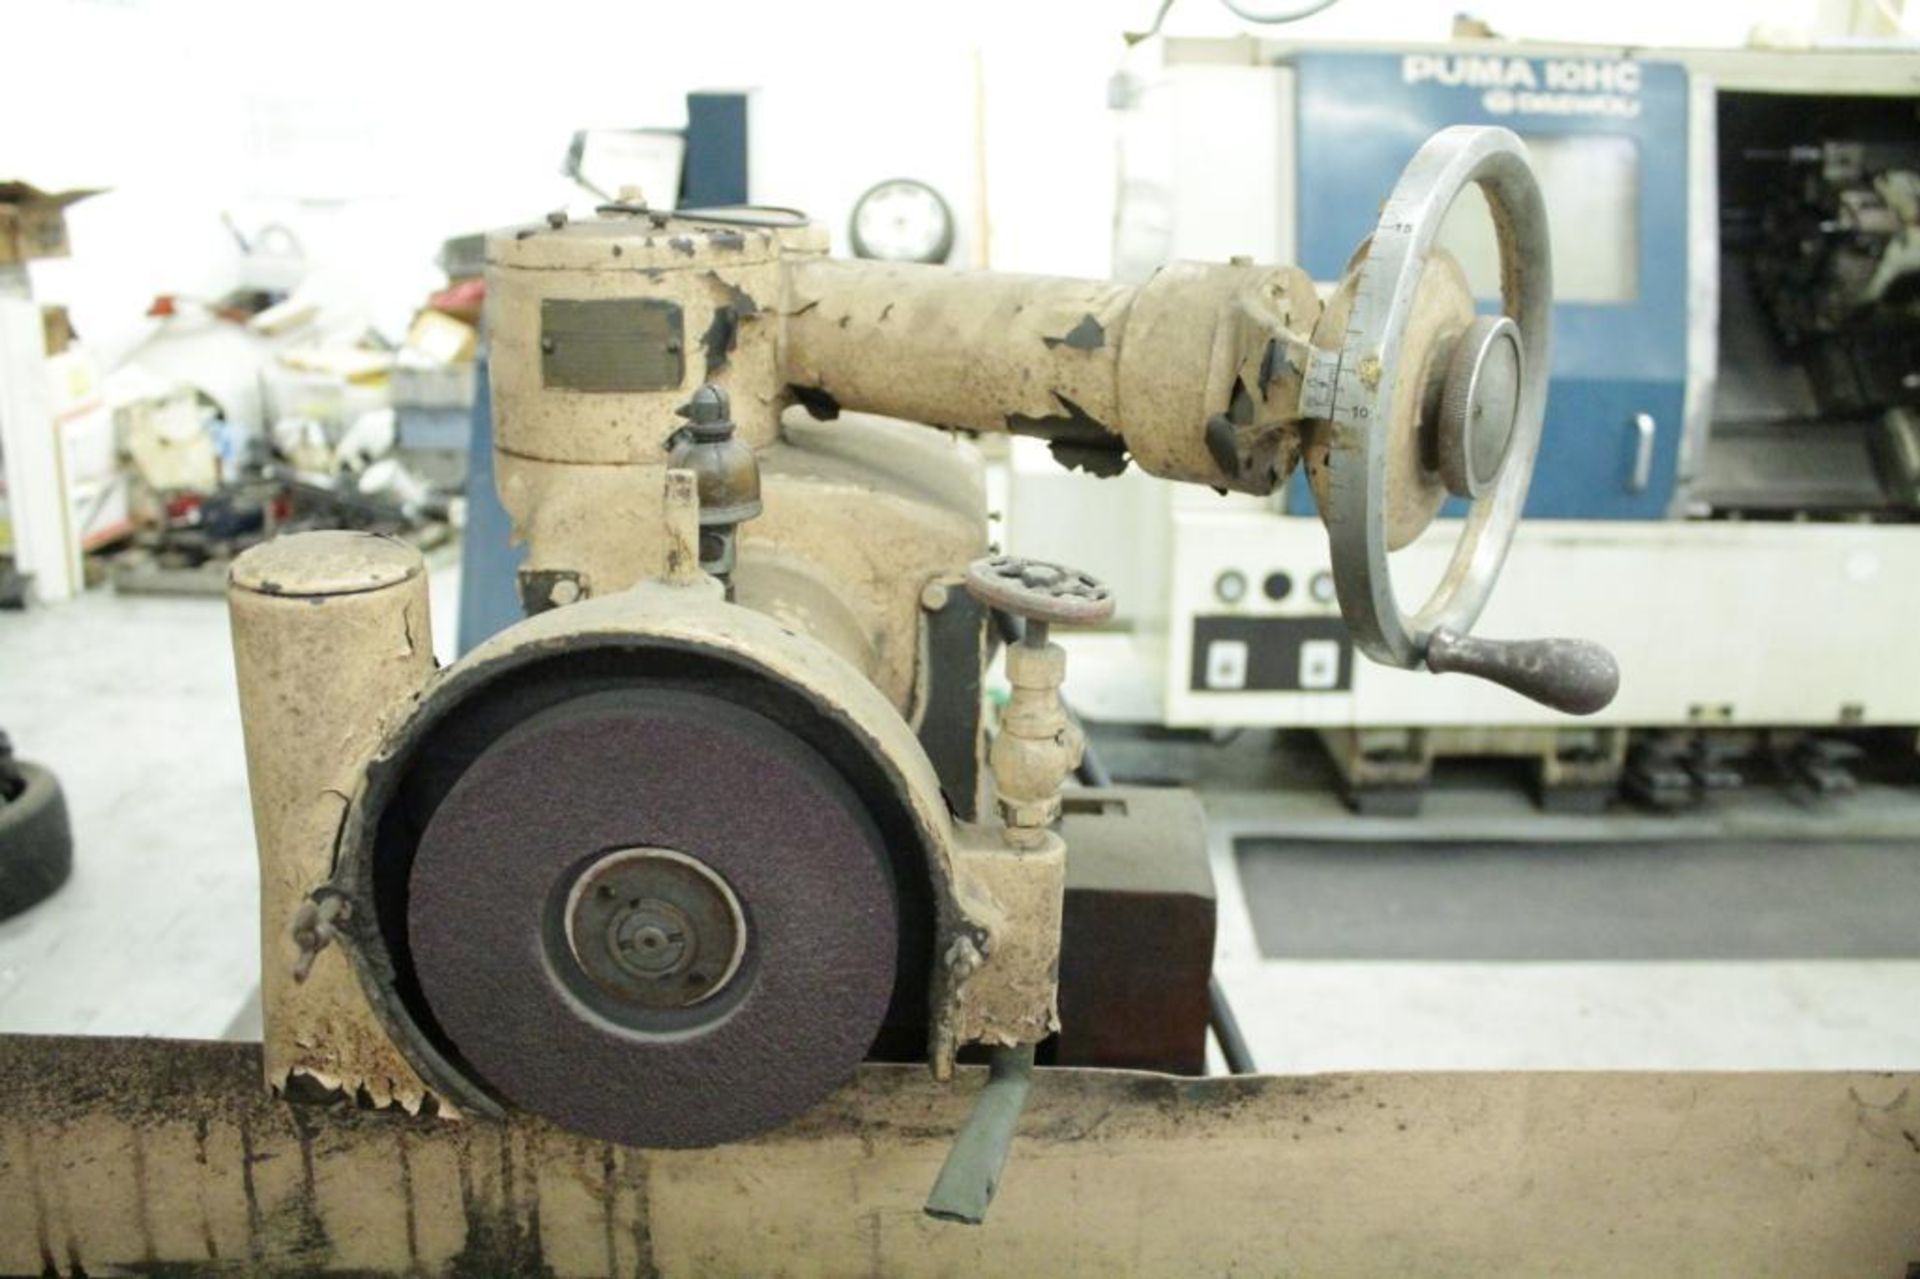 DoAll 6" x 18" surface grinder - Image 3 of 9